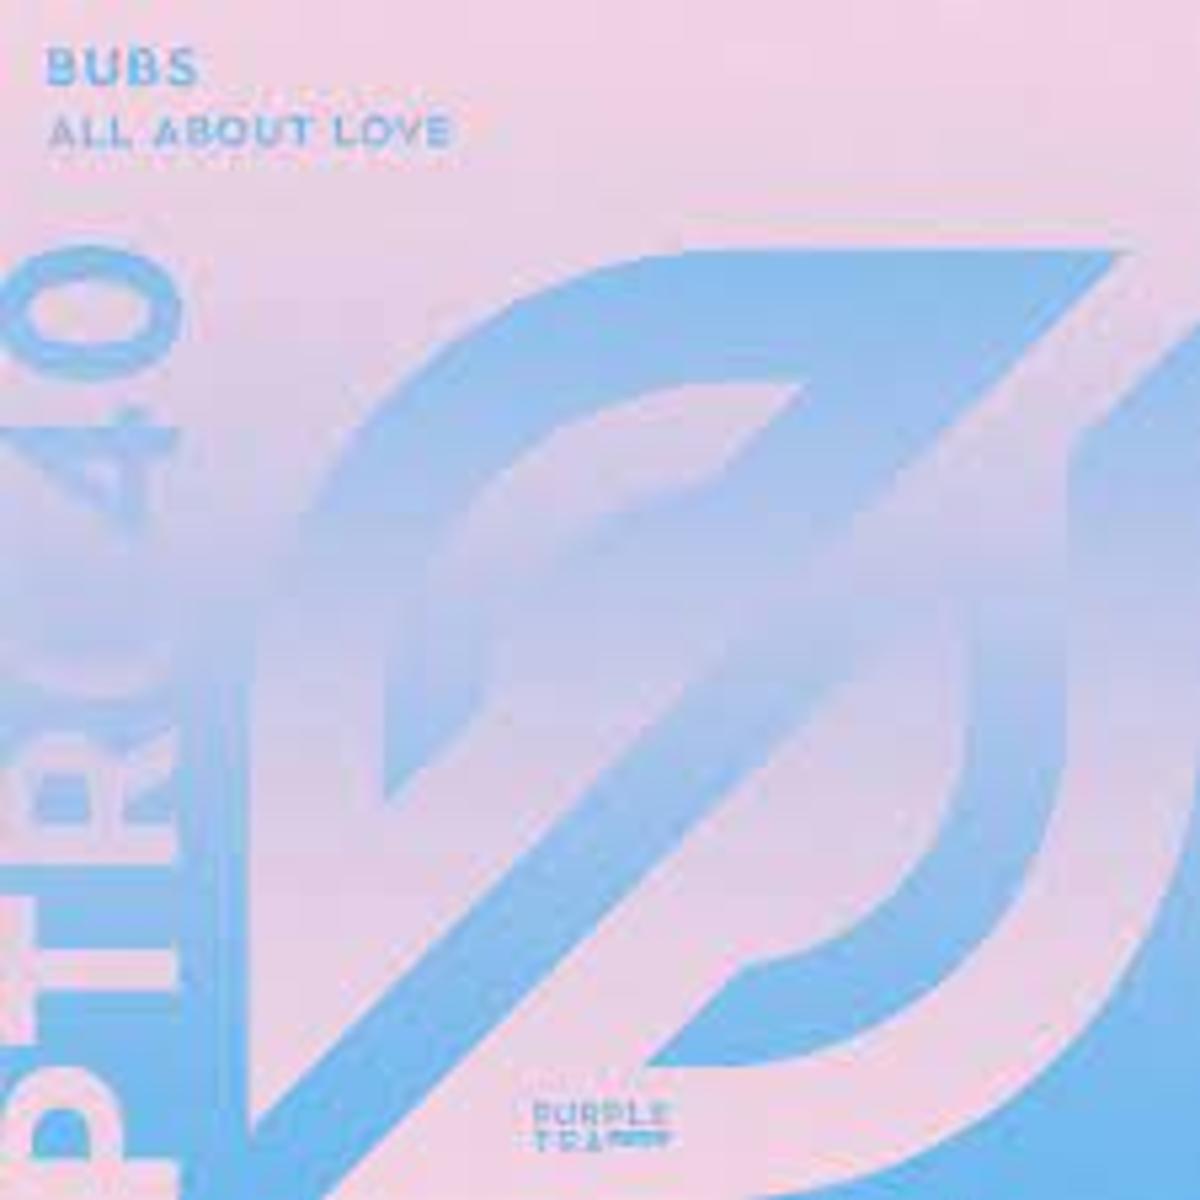 Bubs - All About Love (Radio Edit)